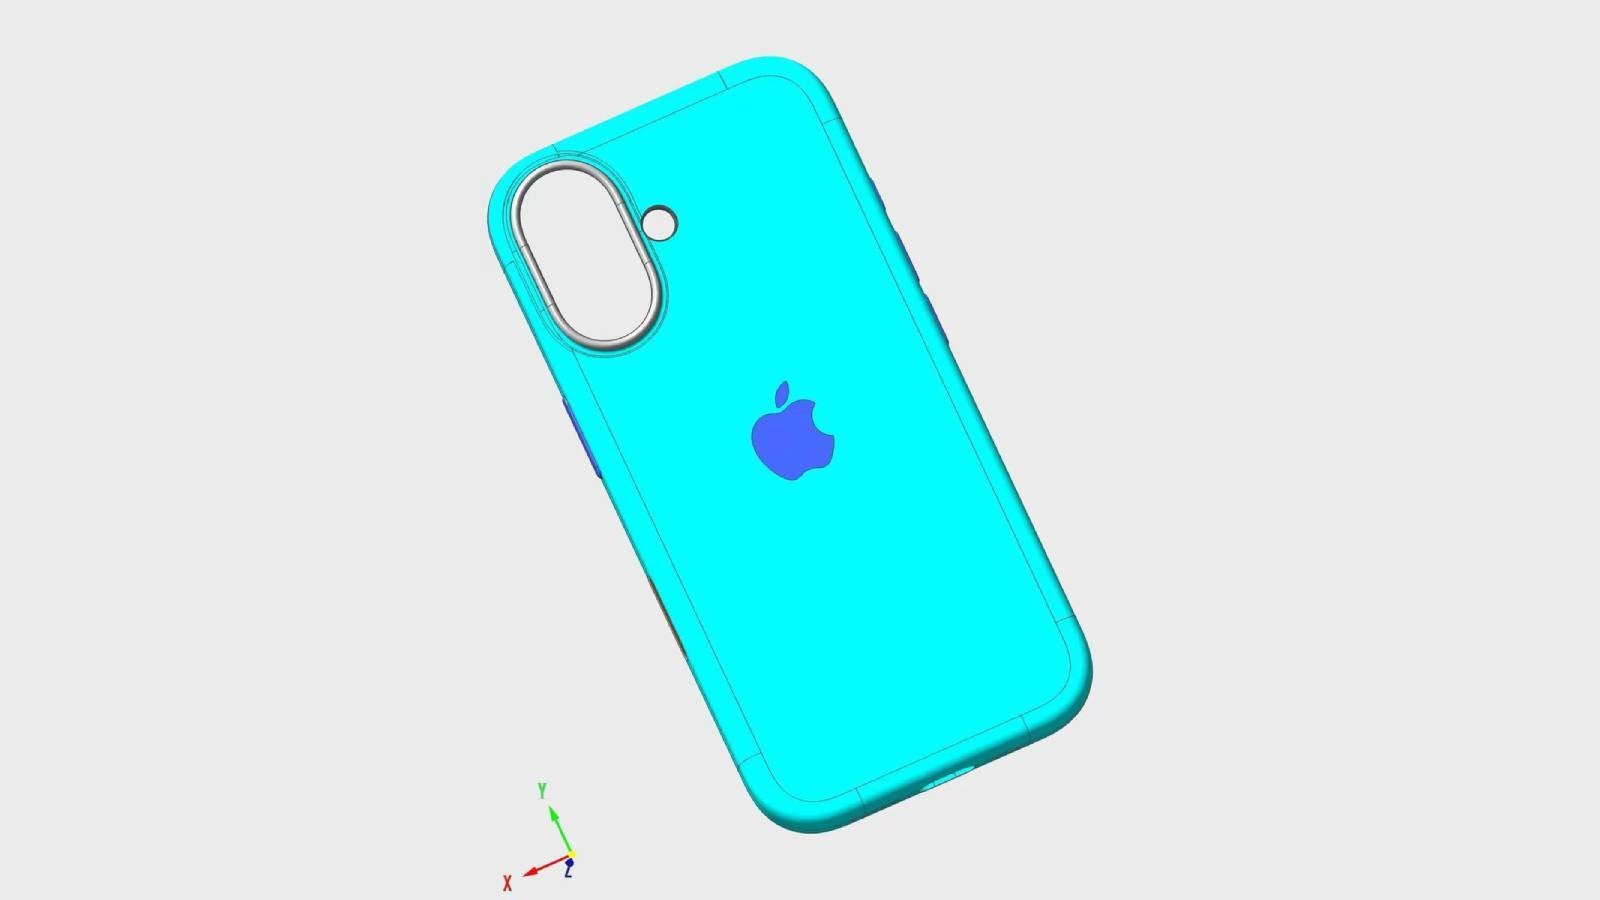 Leaked iPhone 16 CAD Image Highlights Alleged Design Changes – Leaked iPhone 16 Render Shows Off Slimmer Camera Island and Two New Buttons